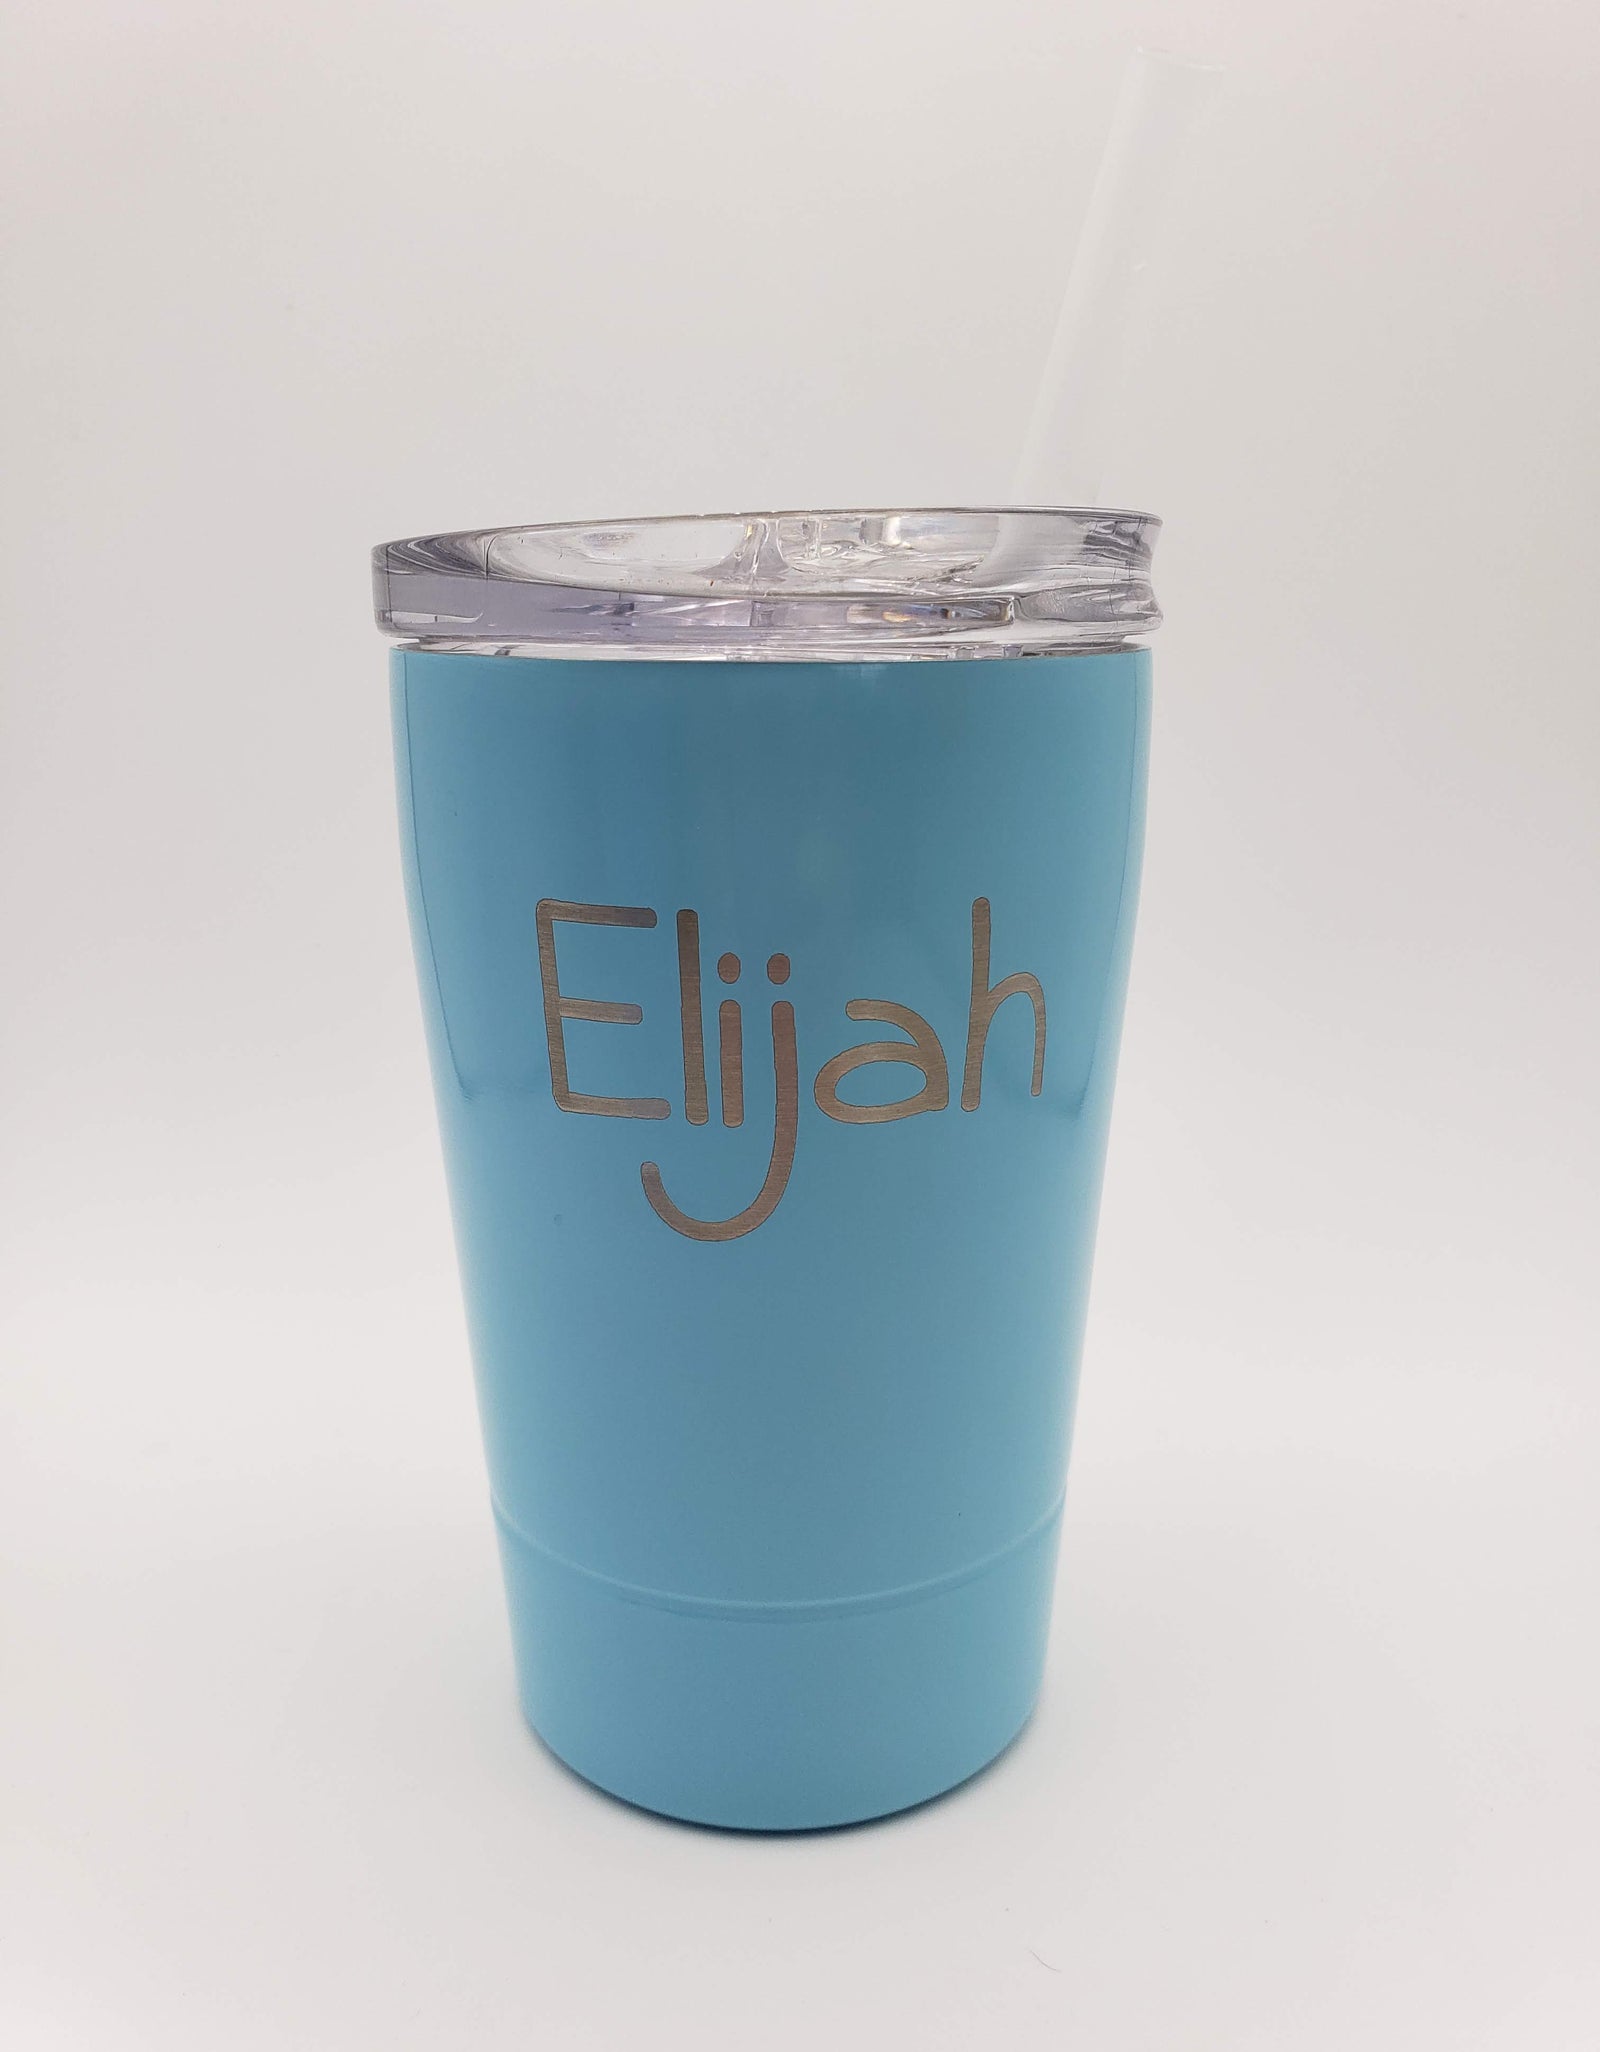 I Am Mermazing - Kids Stainless Steel Tumbler with Lid and Straw